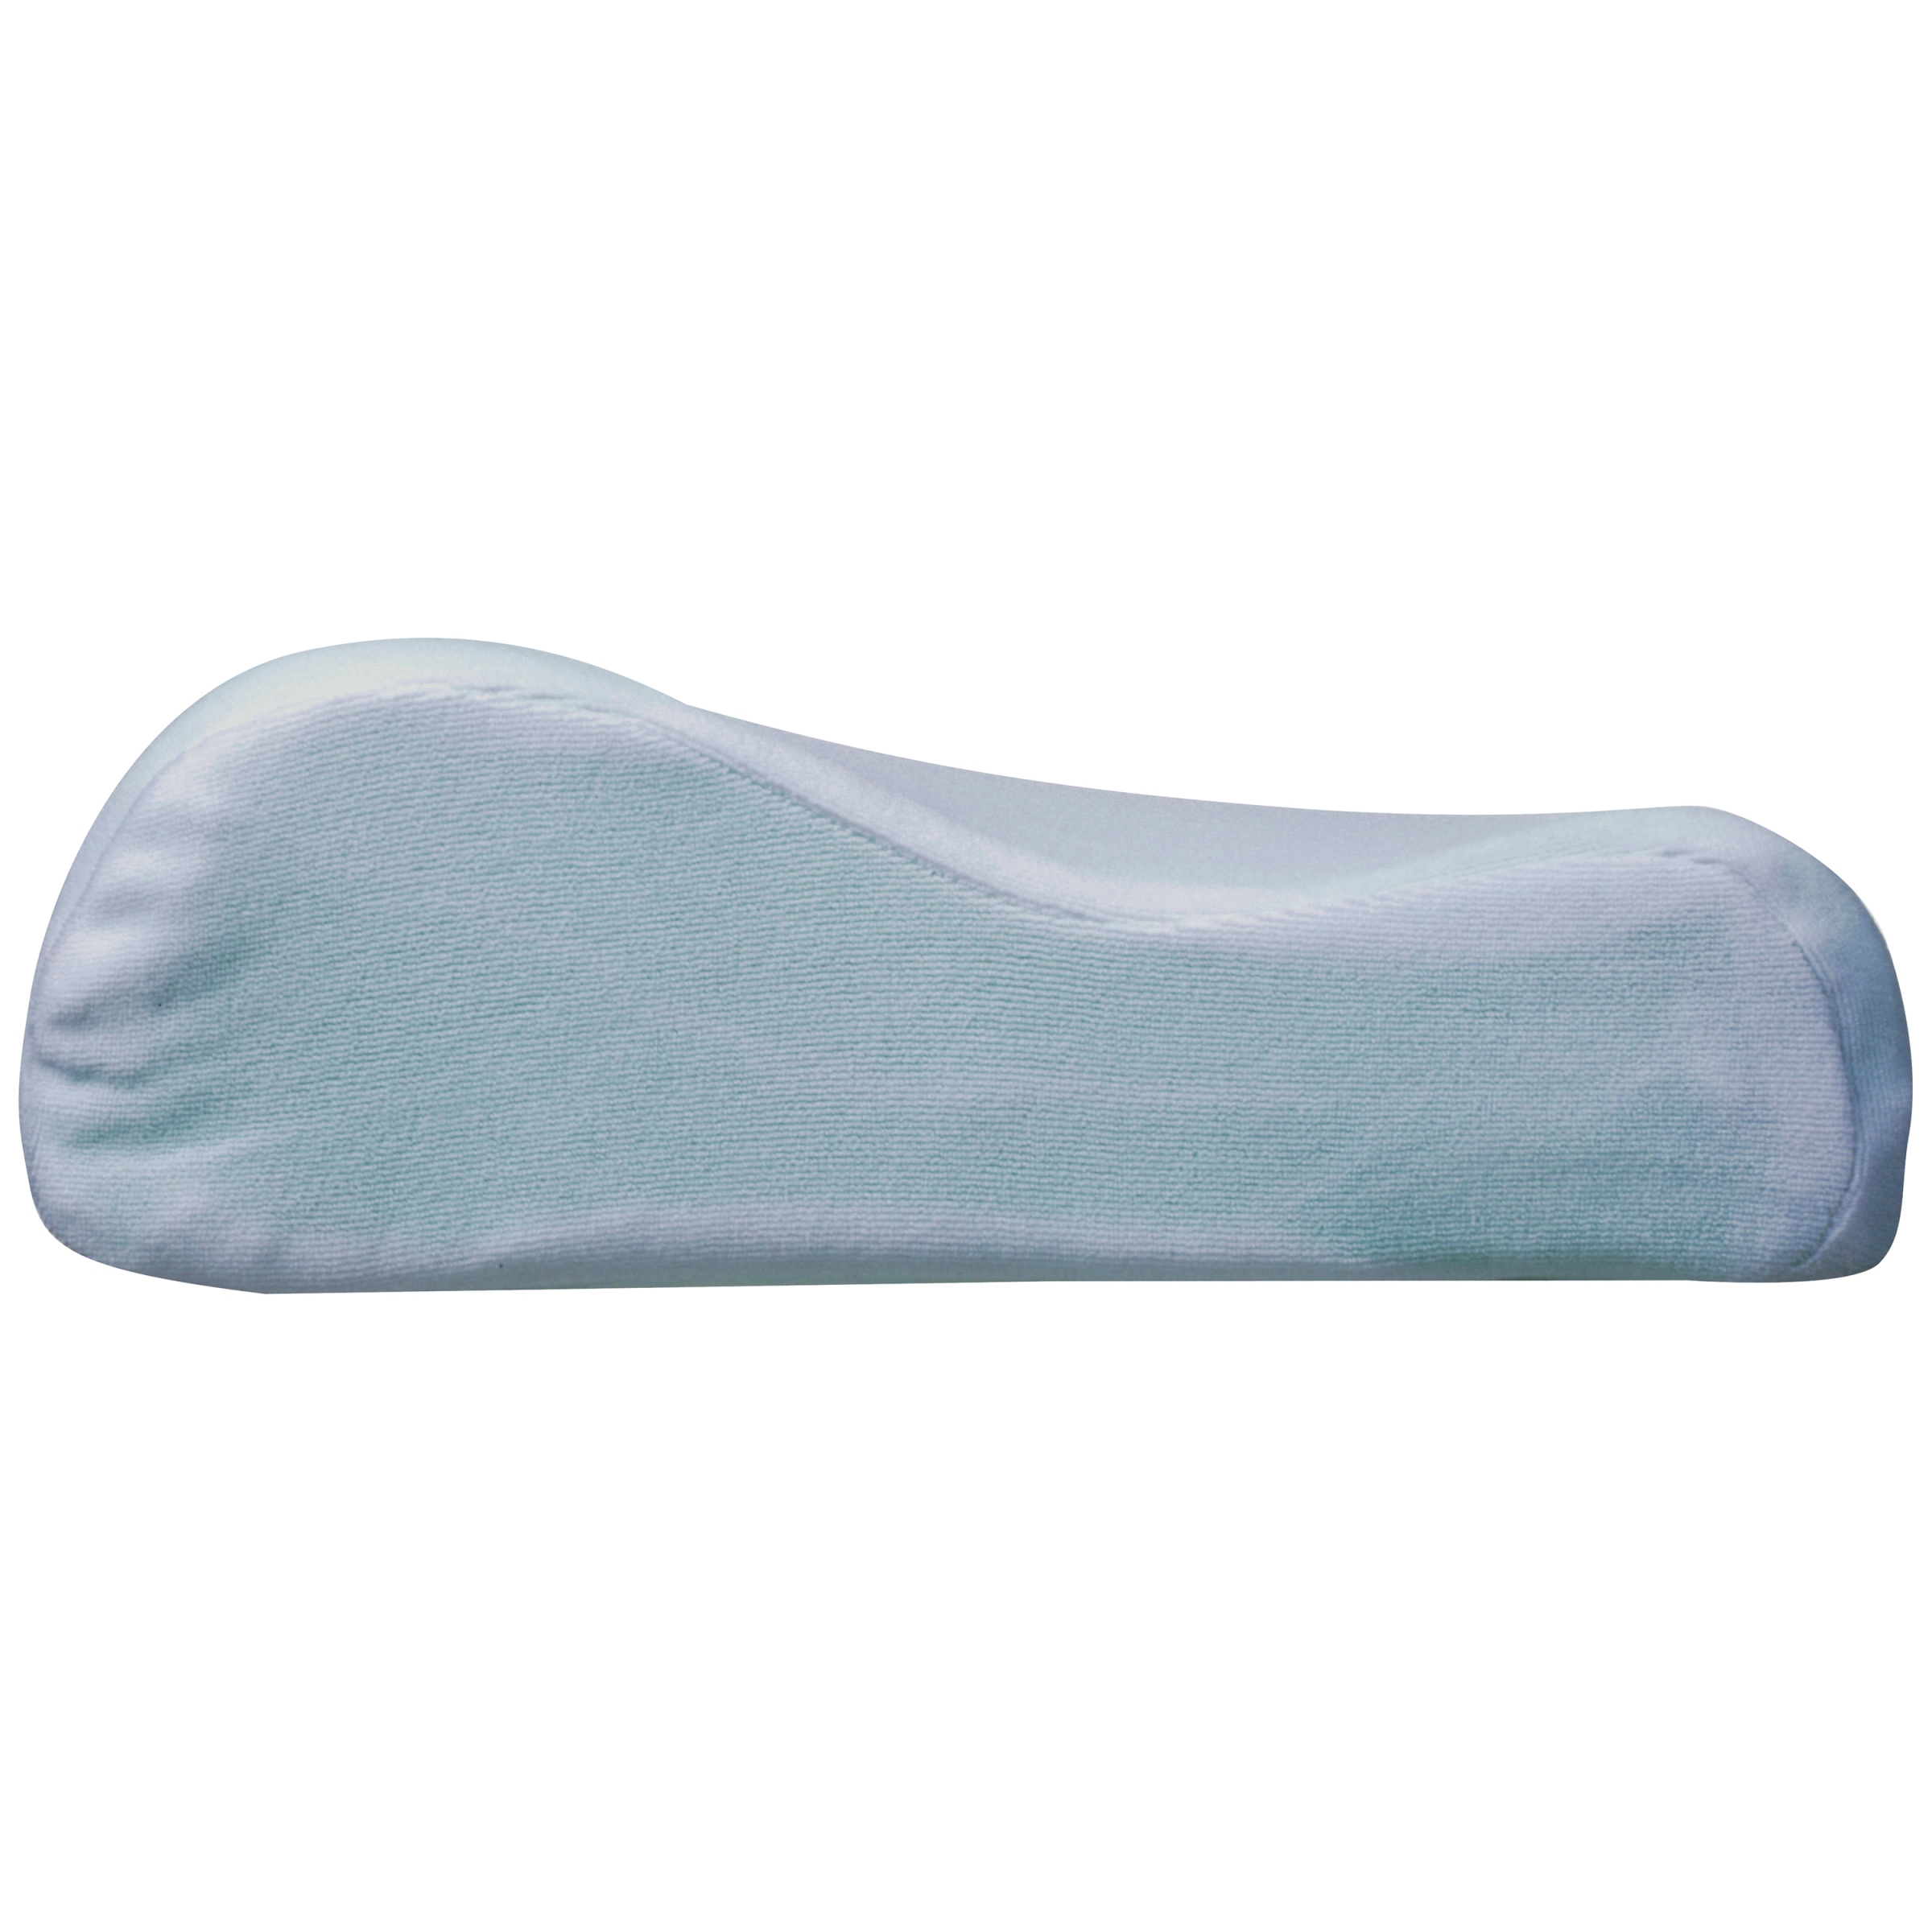 Mainstays Memory Foam Contour Pillow, Green Tea Extracts for Odor Control - image 3 of 3